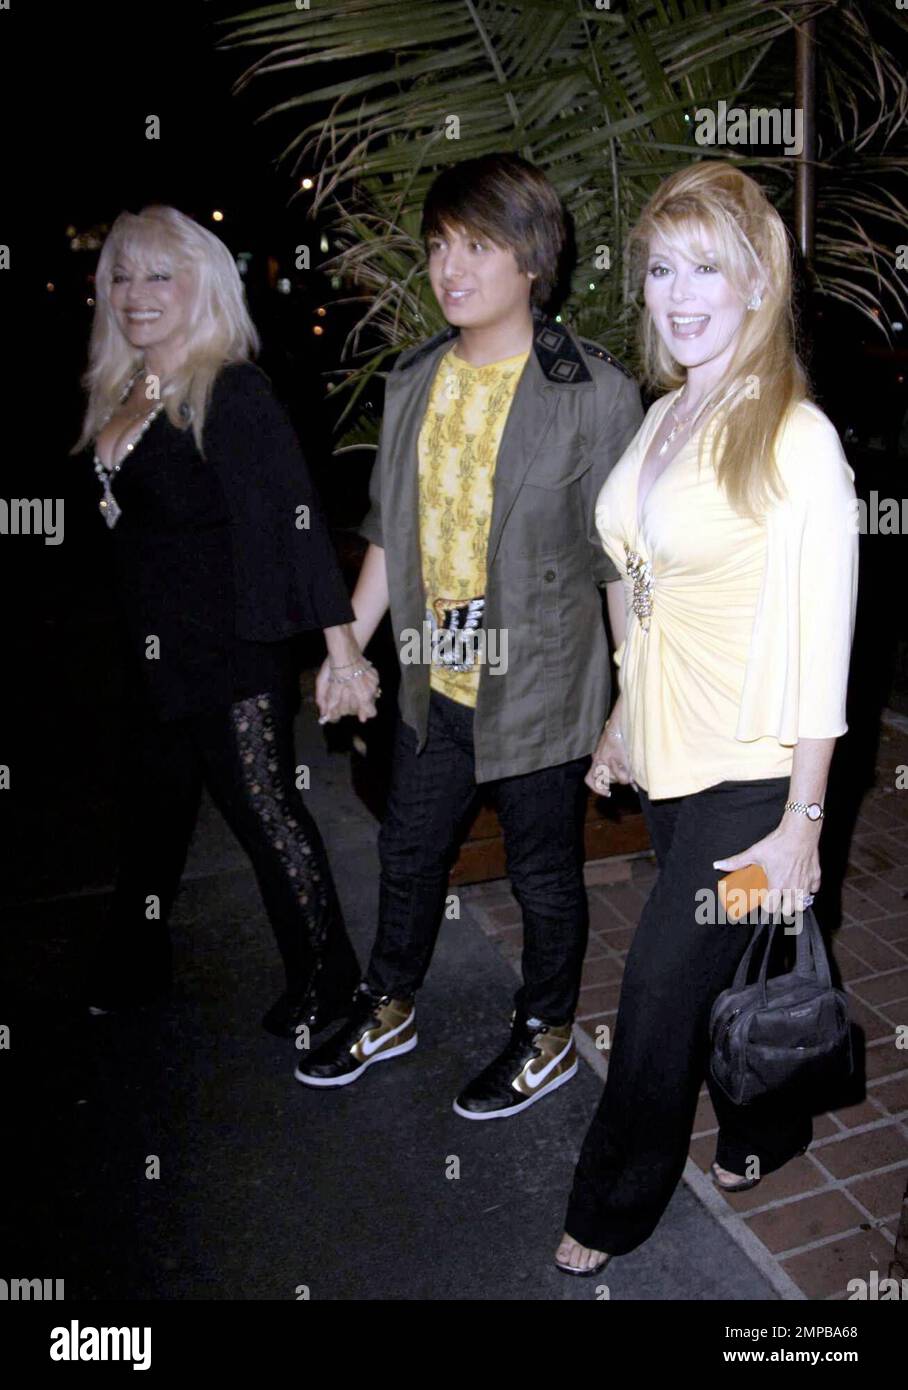 Audrey Landers and her son Daniel  arrive at the restaurant Madeos with Audrey's mother [check], stopping to talk to photographers as they enter. Audrey's sister Judy and her daughters Kristy and Lindsey were also there for the evening. Los Angeles, CA. 11/19/08. Stock Photo